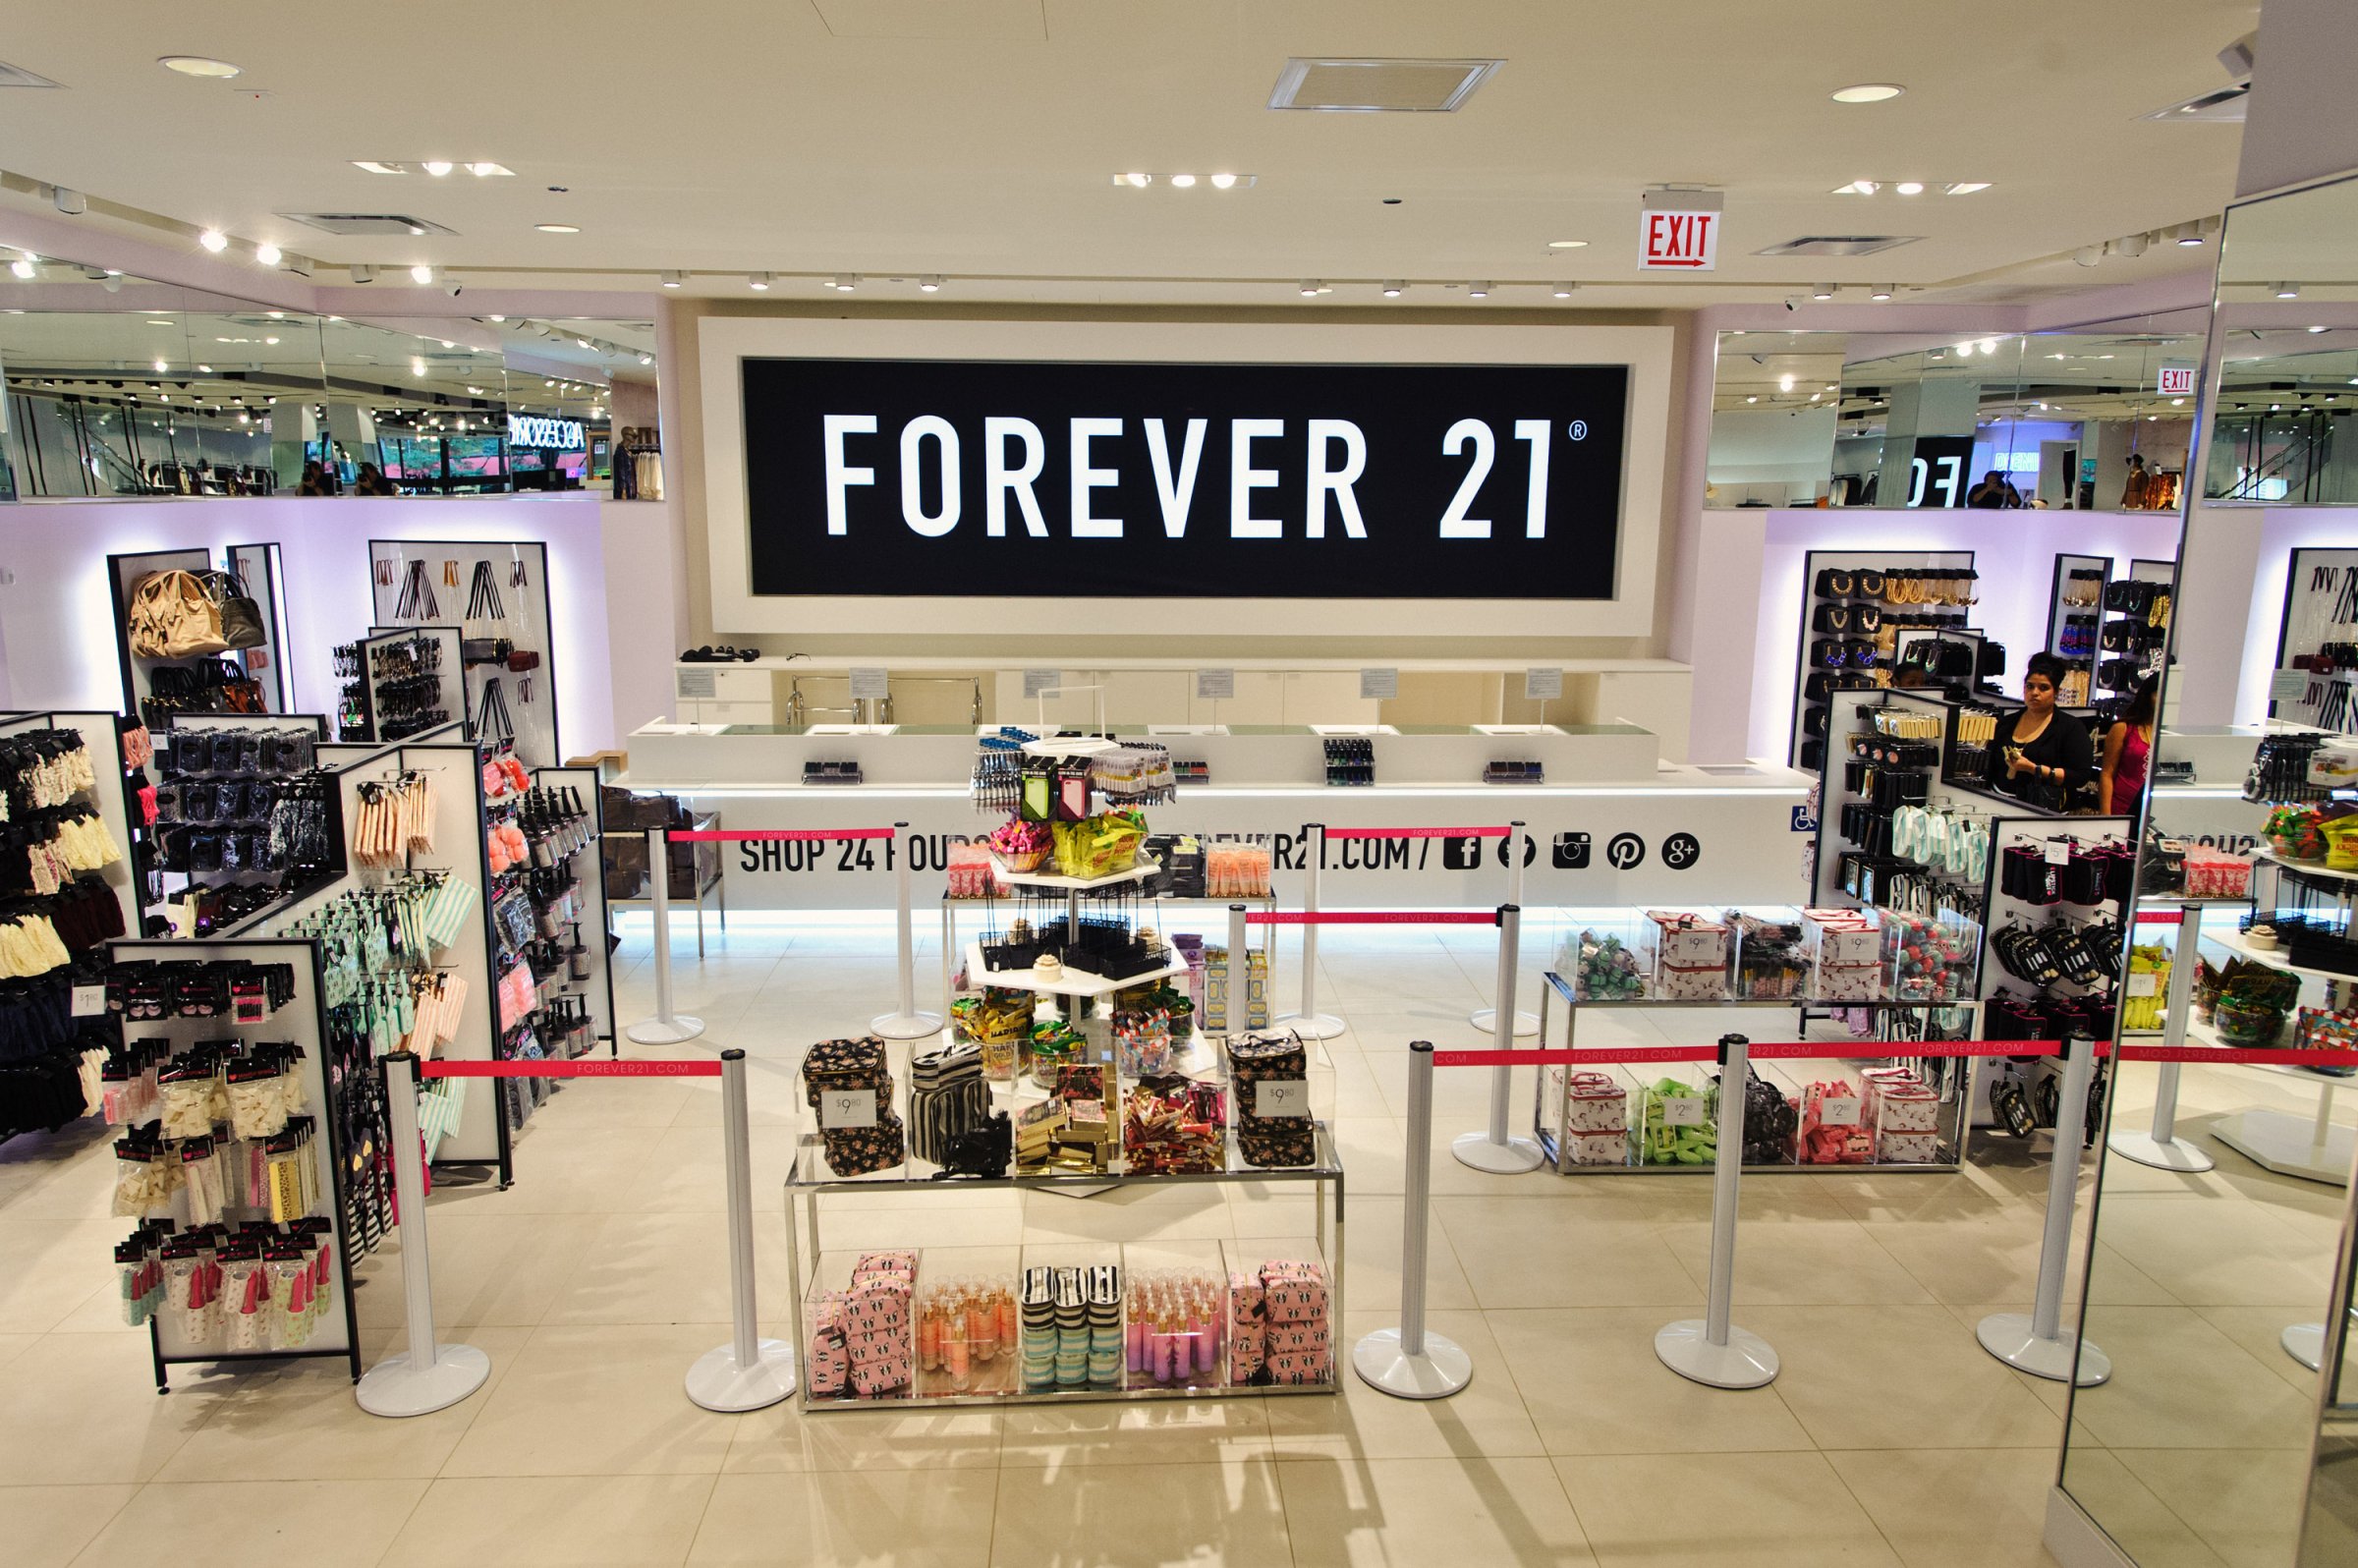 General atmosphere of the new Forever 21 store on South State Street on August 8, 2014 in Chicago, Illinois.